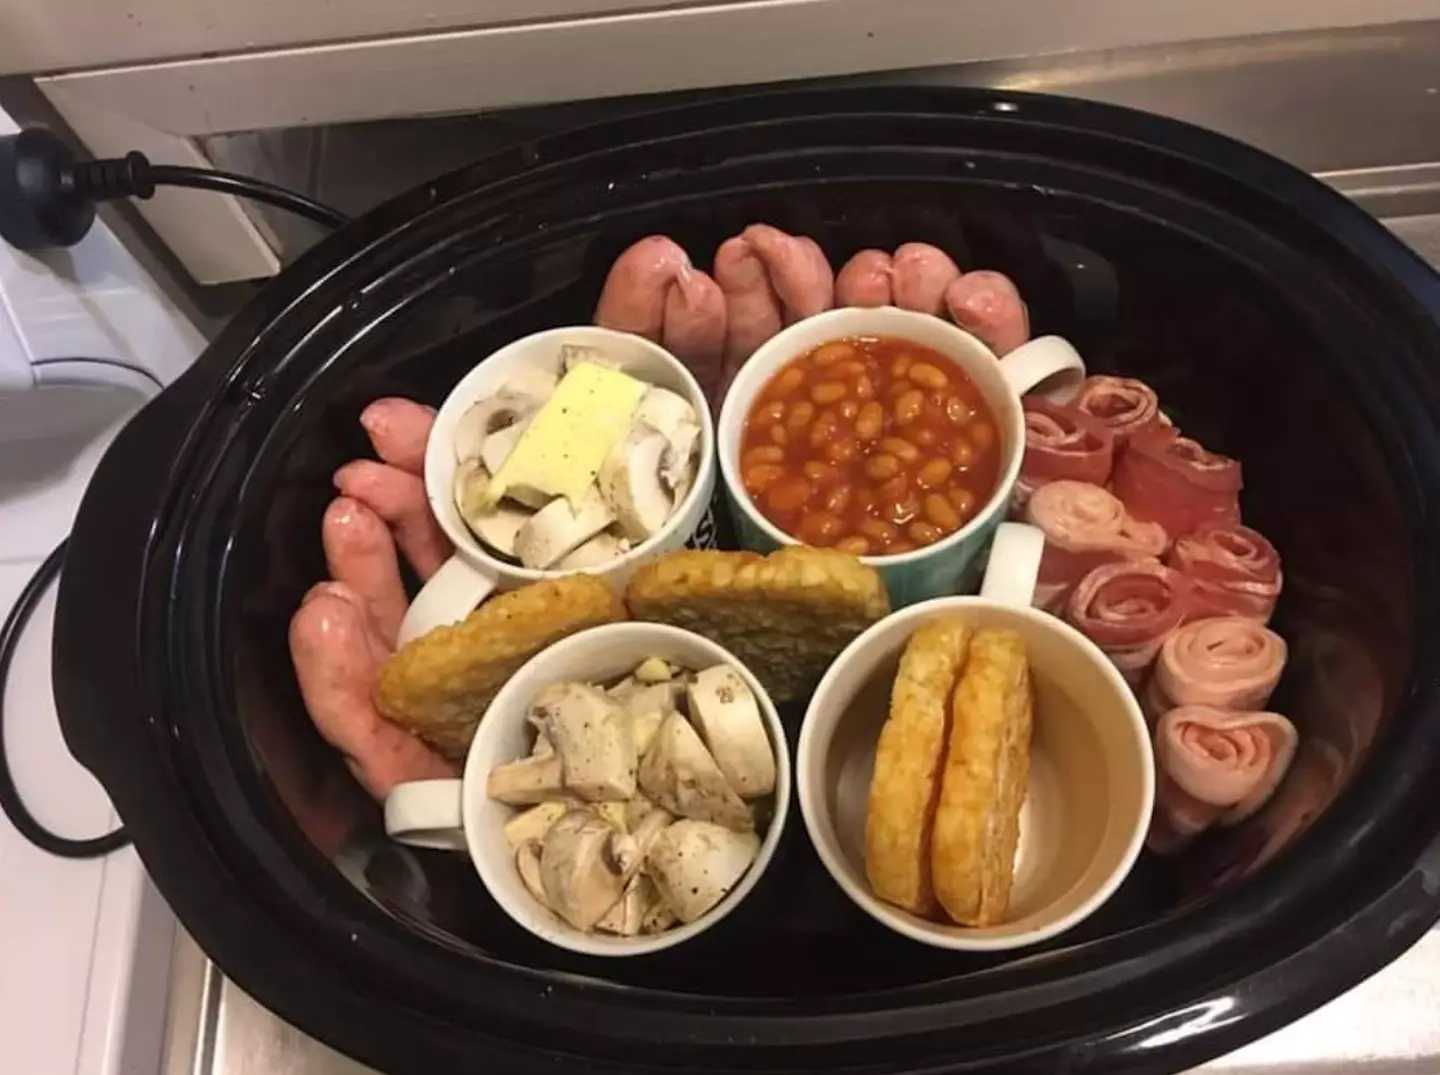 The mum has shared her top tips for making the perfect slow cooker big breakfast.